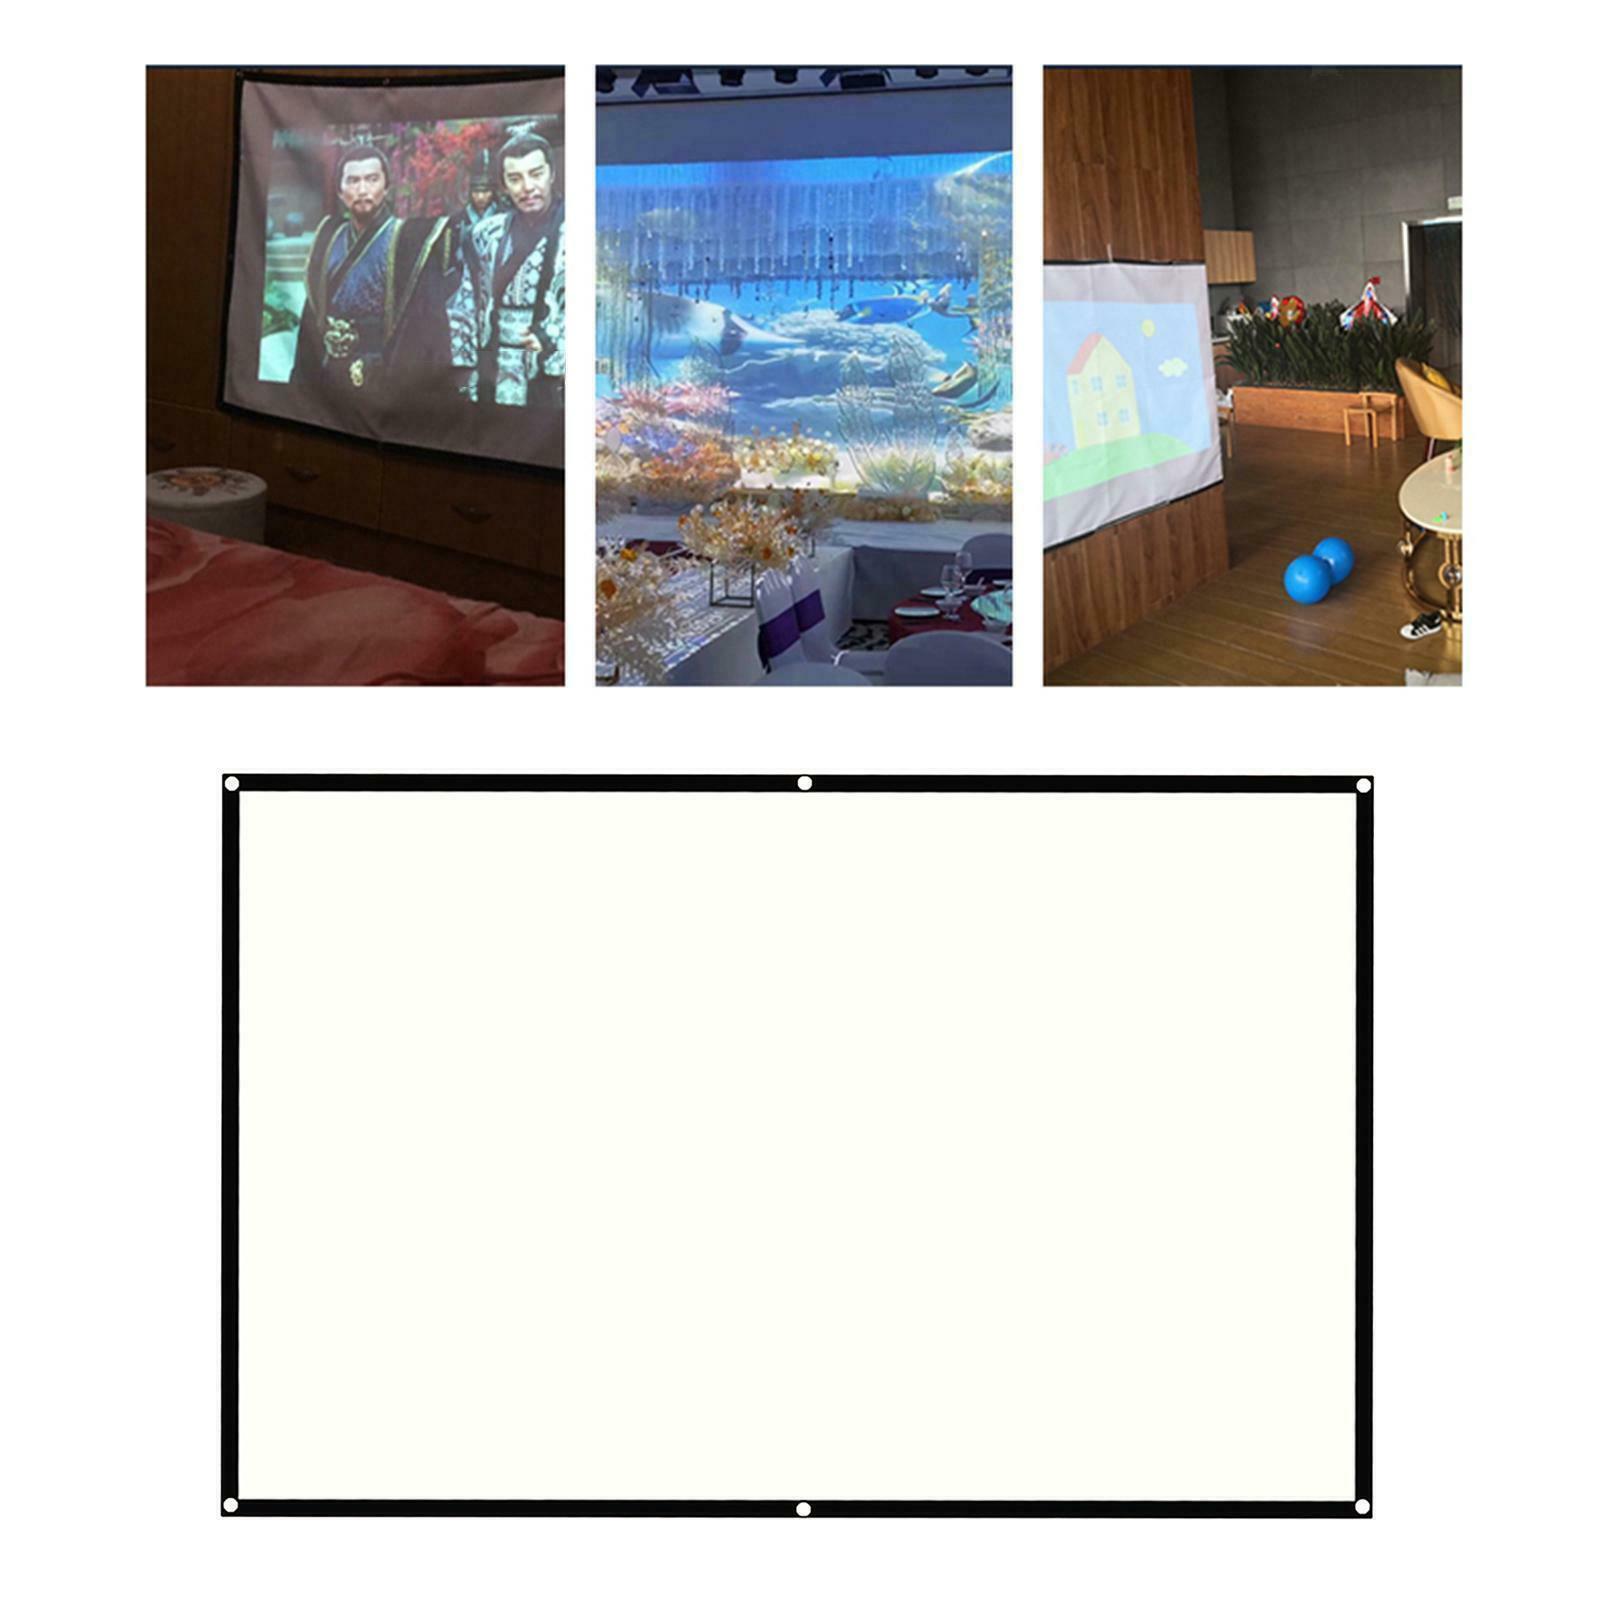 Primary image for 100" Foldable Projection Screen 16:9 HD 4K Home Theater Cinema Movie Projection